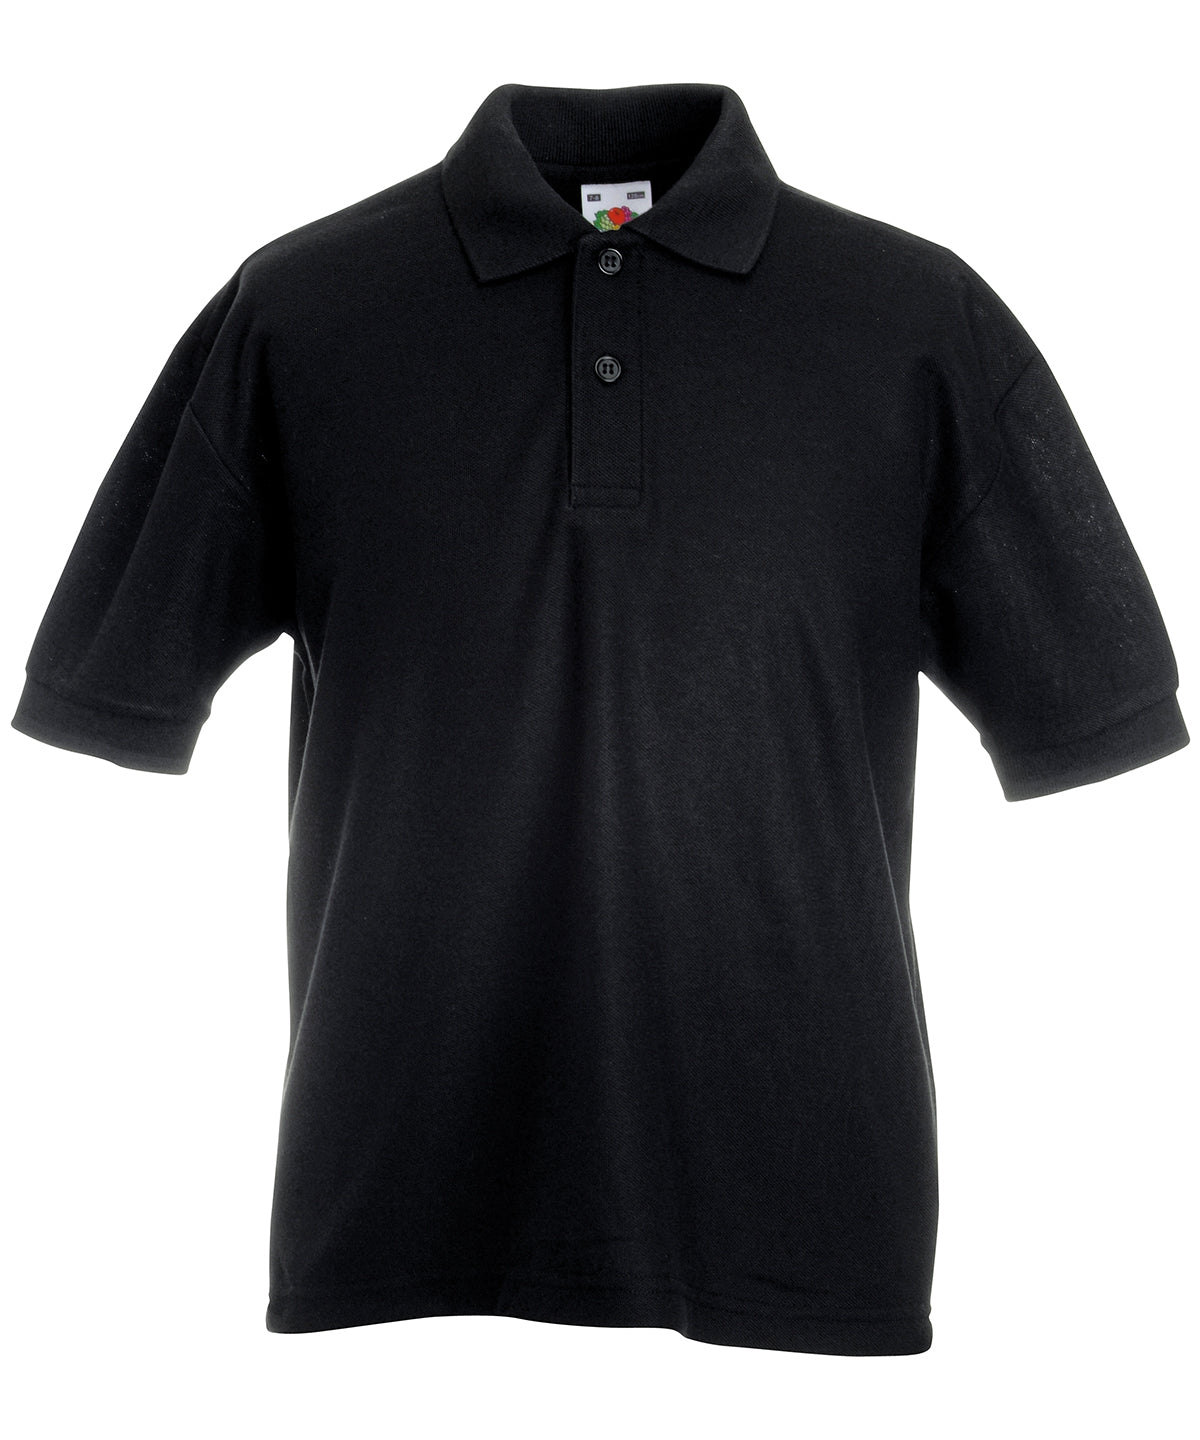 Personalised Polo Shirts - Black Fruit of the Loom Kids 65/35 piqué polo